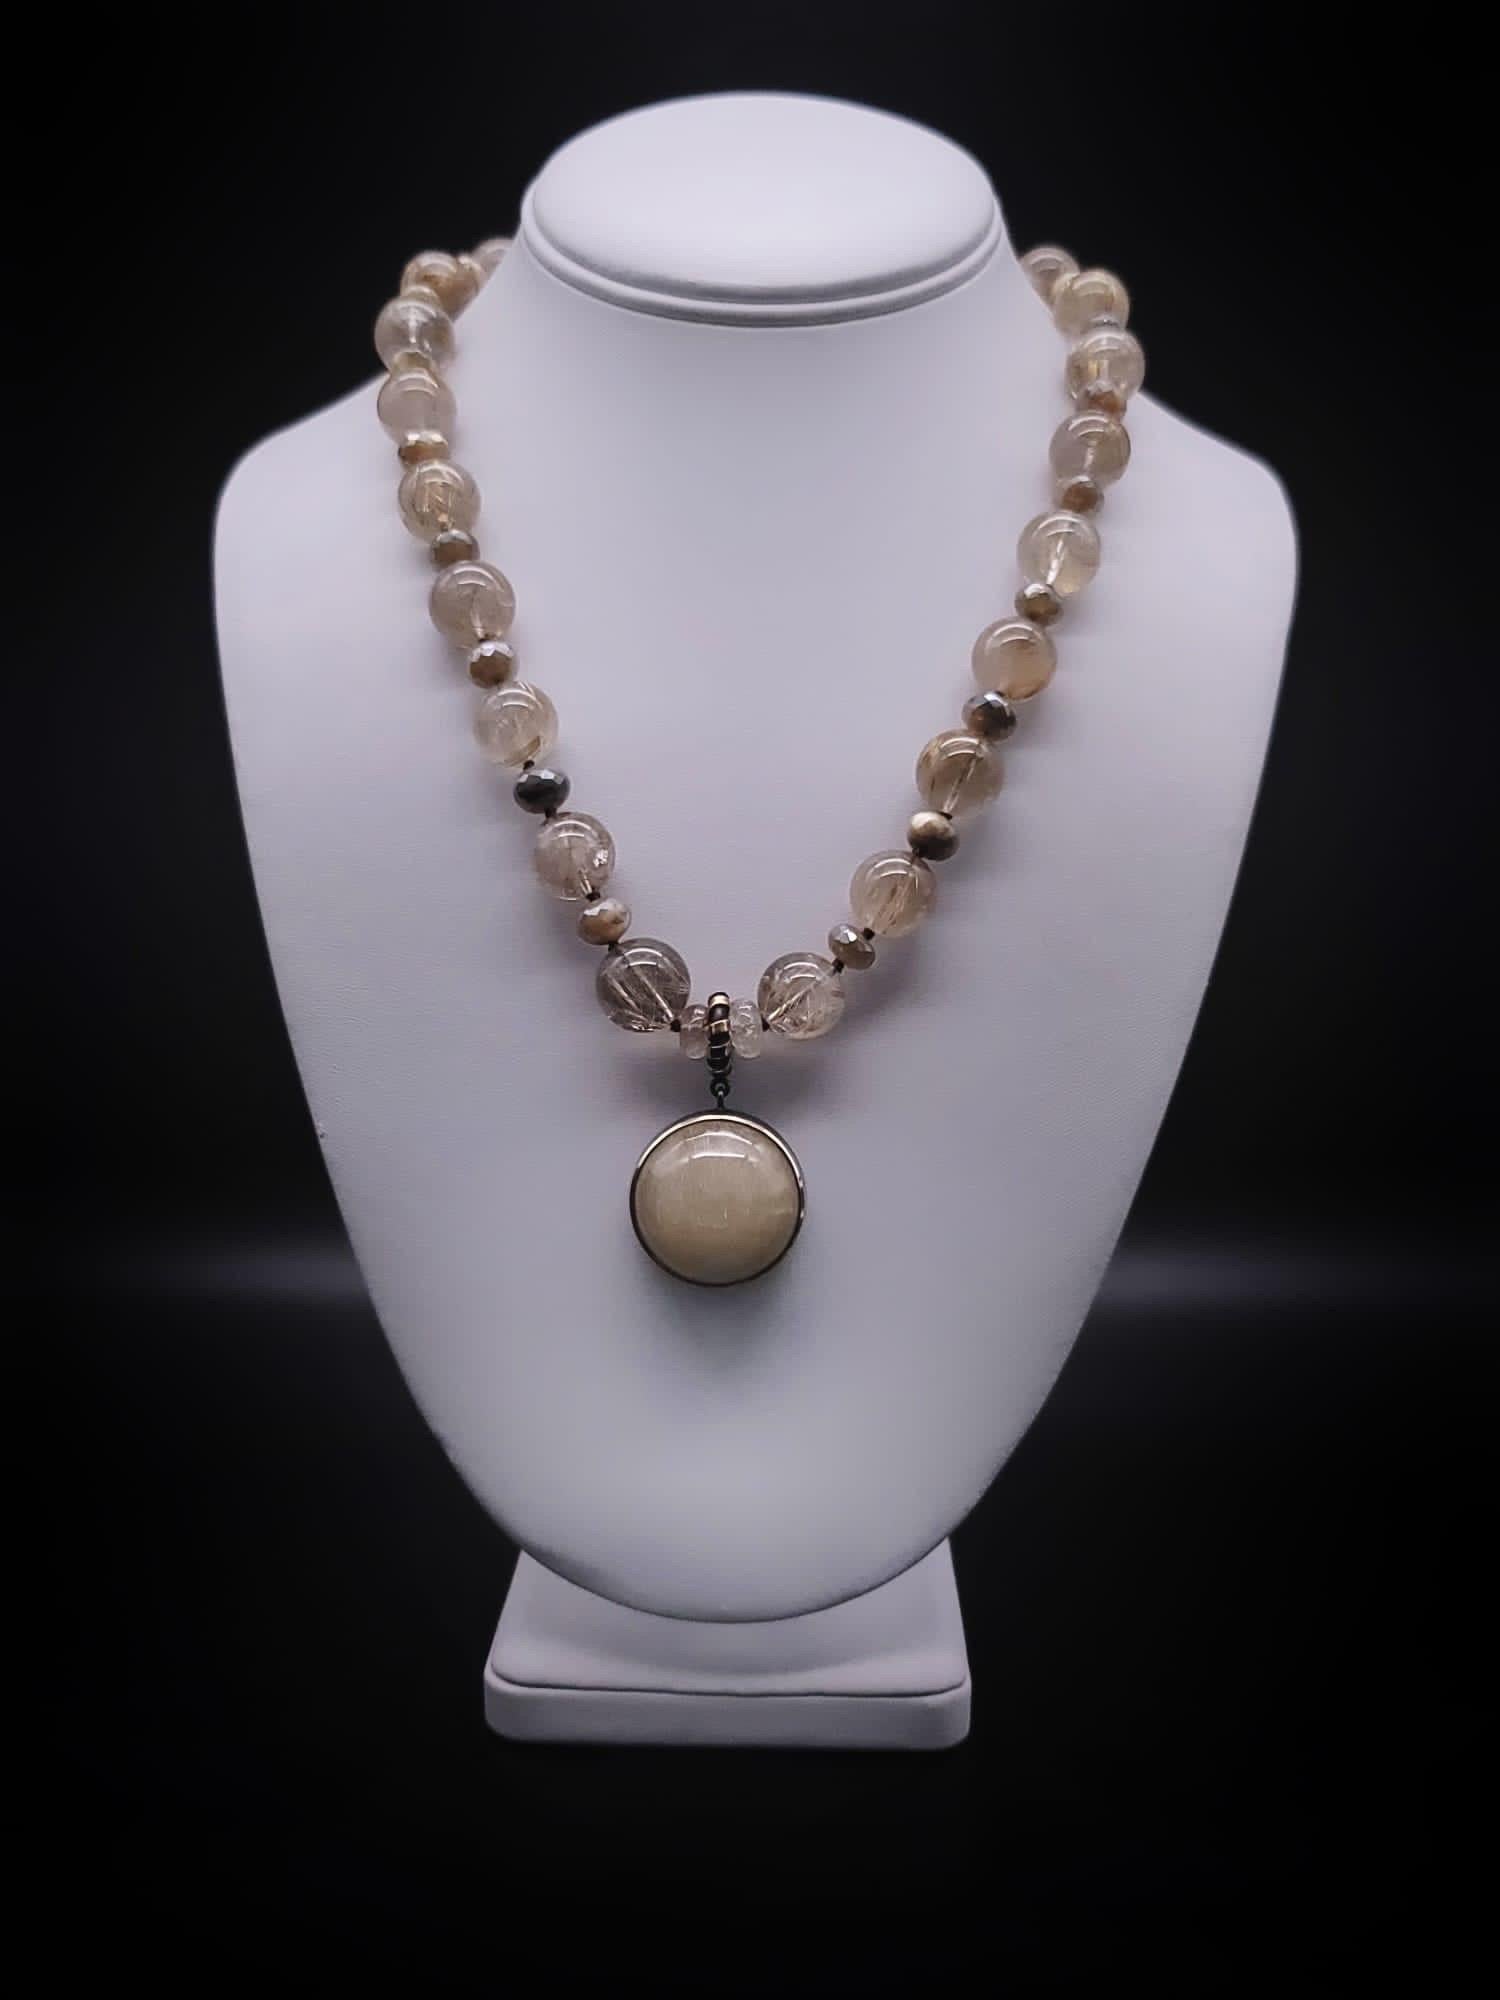 One-of-a-Kind

Golden rutilated quartz  16m.m. bead necklace surrounds a large shaped and polished  Rutile cabochon stone set in a brass pendant handcrafted by Bora. The Rutilated quartz beads with golden rutile running through the stone. No two